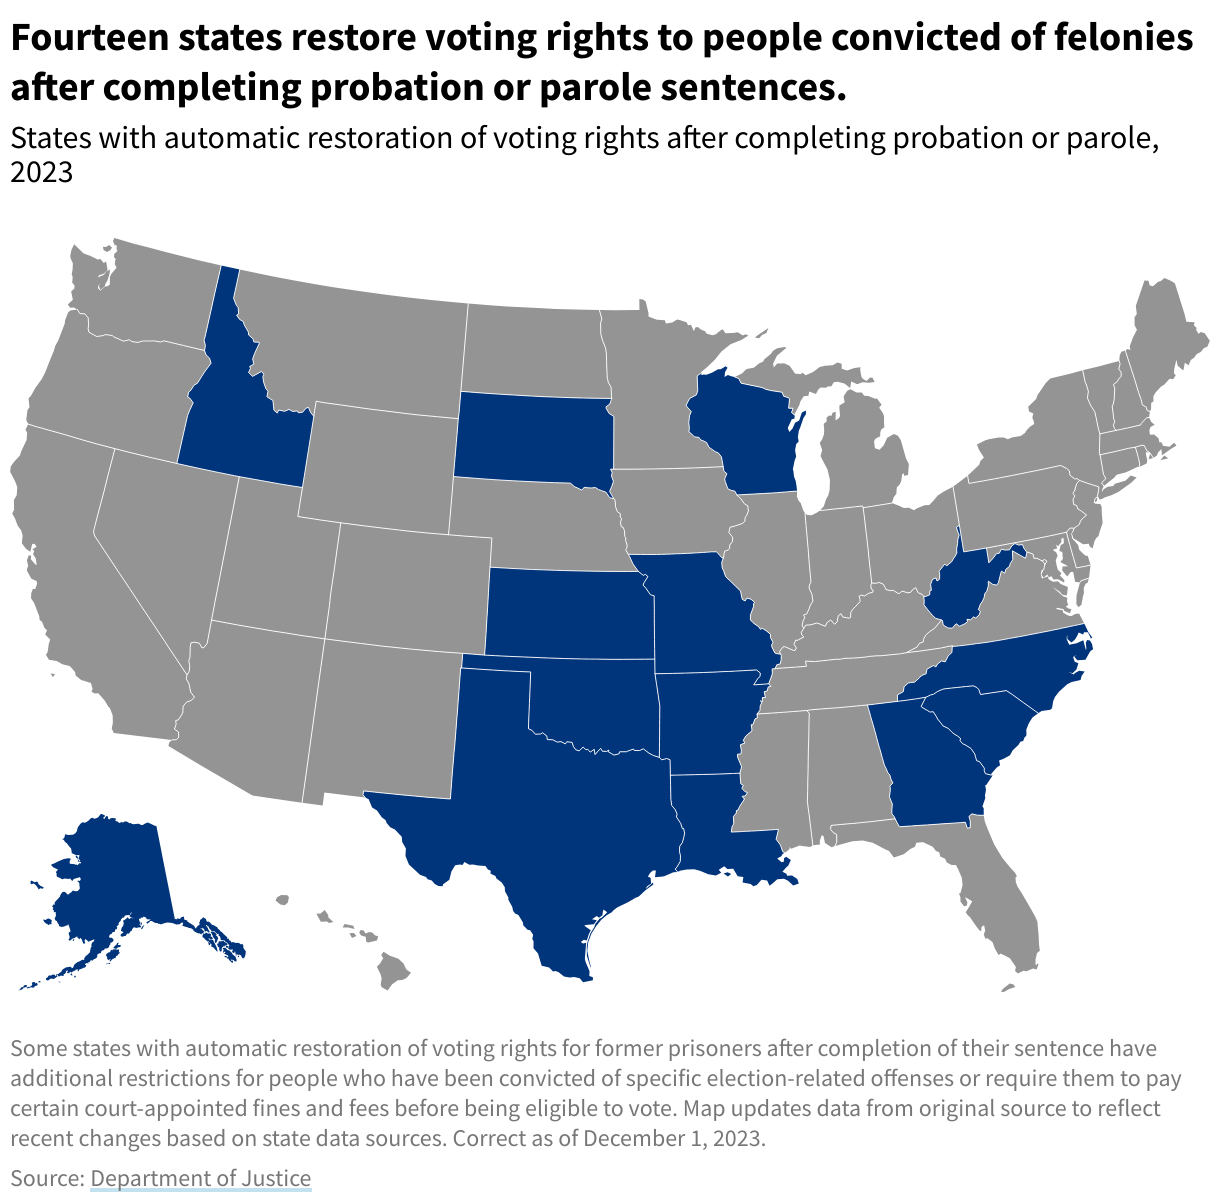 USA map of 14 states with automatic restoration of voting rights after completing probation or parole.